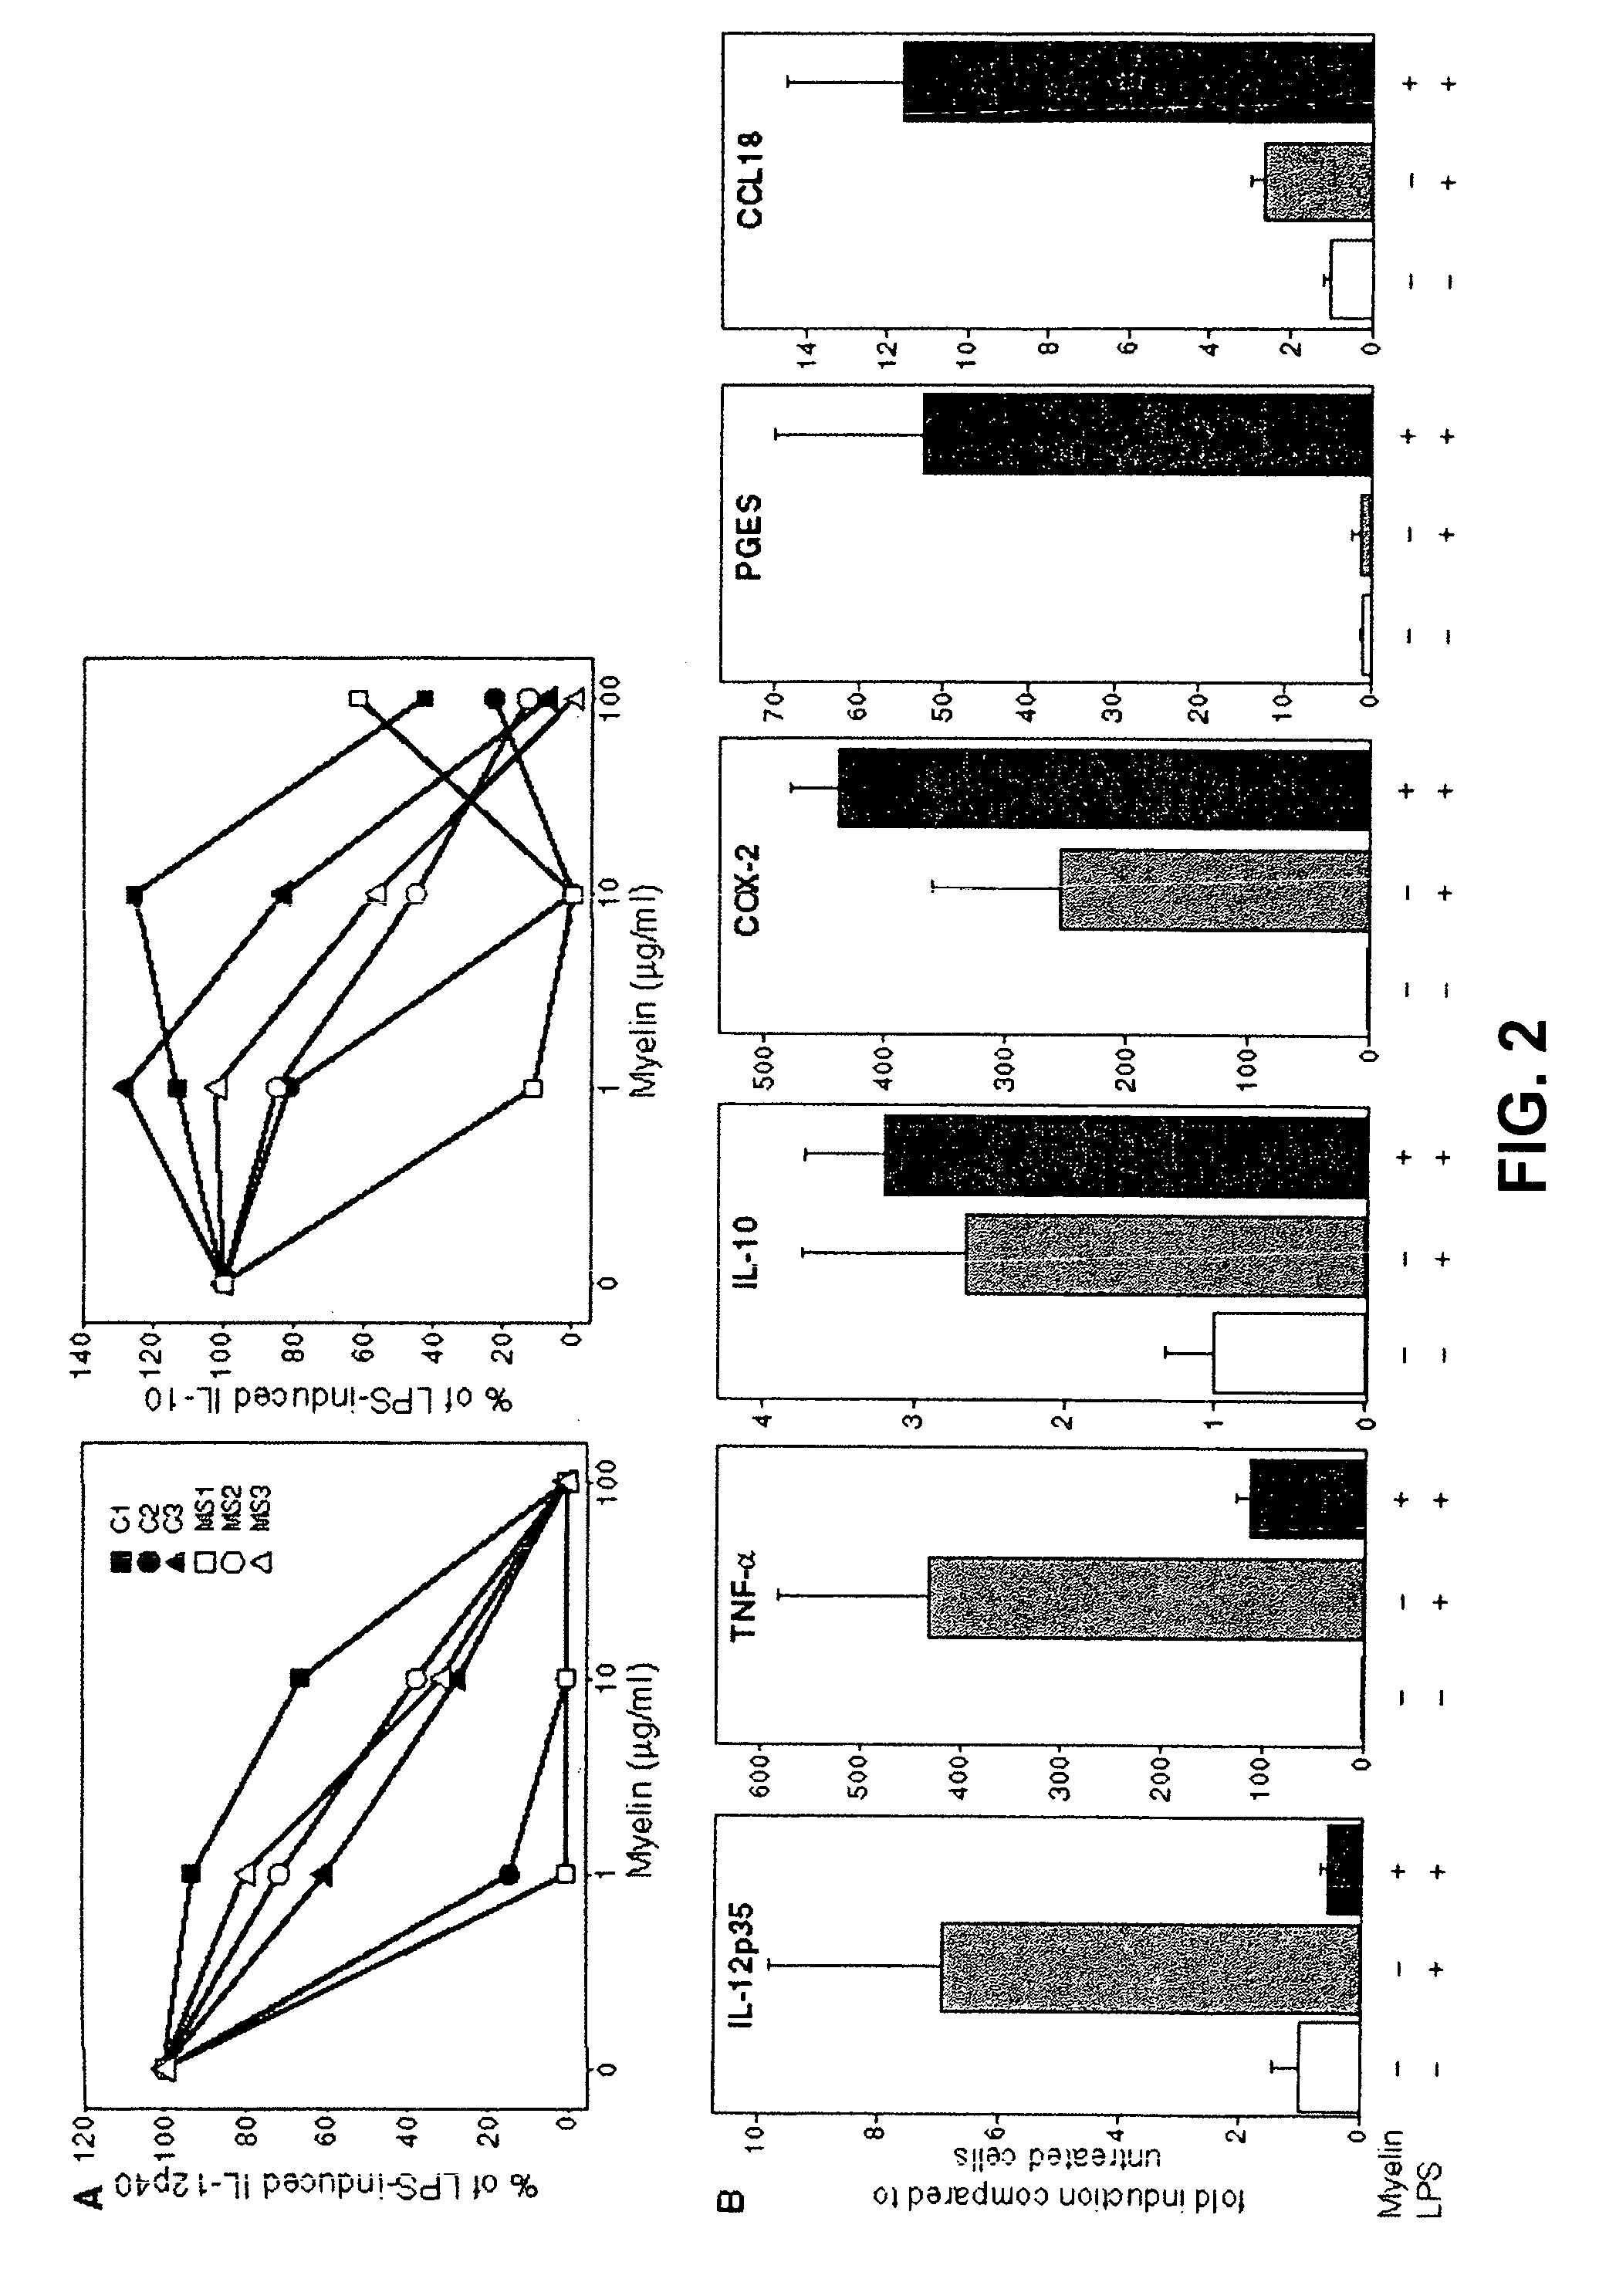 Method for in vitro testing of compounds for assessing therapeutic value in the treatment of multiple sclerosis and other diseases wherein foamy cells are involved in the disease etiology